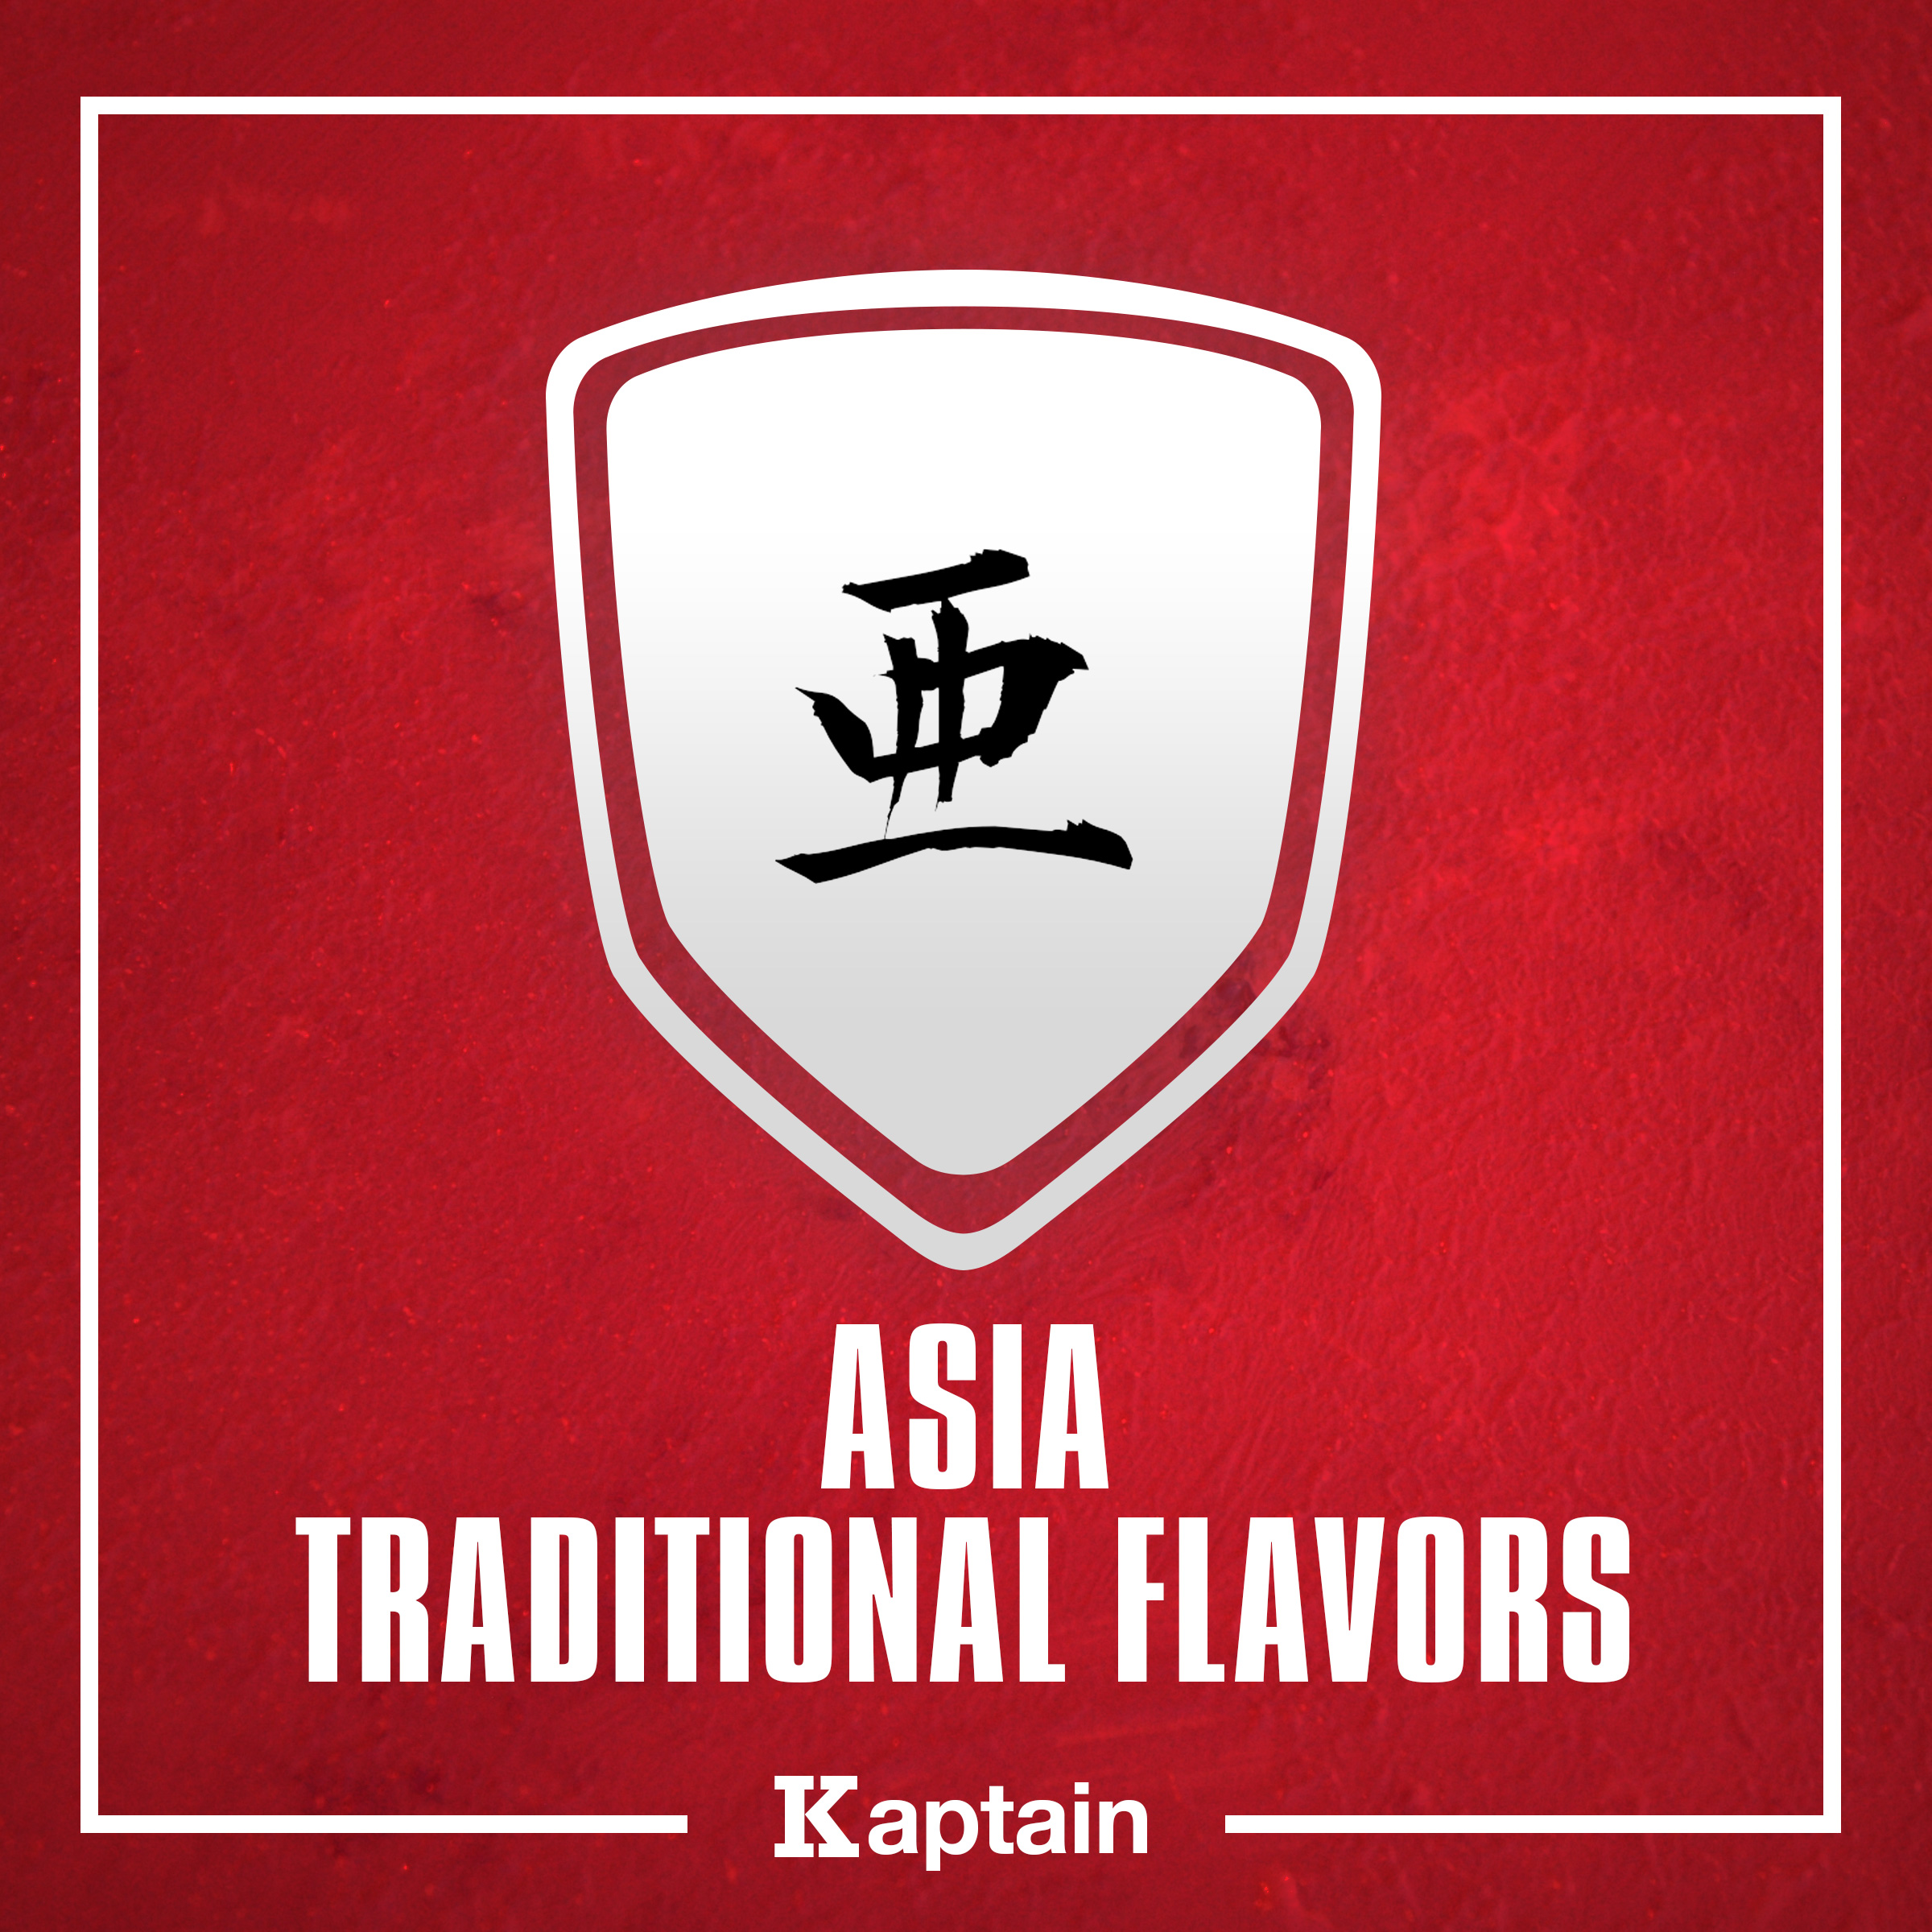 Asia Traditional Flavors